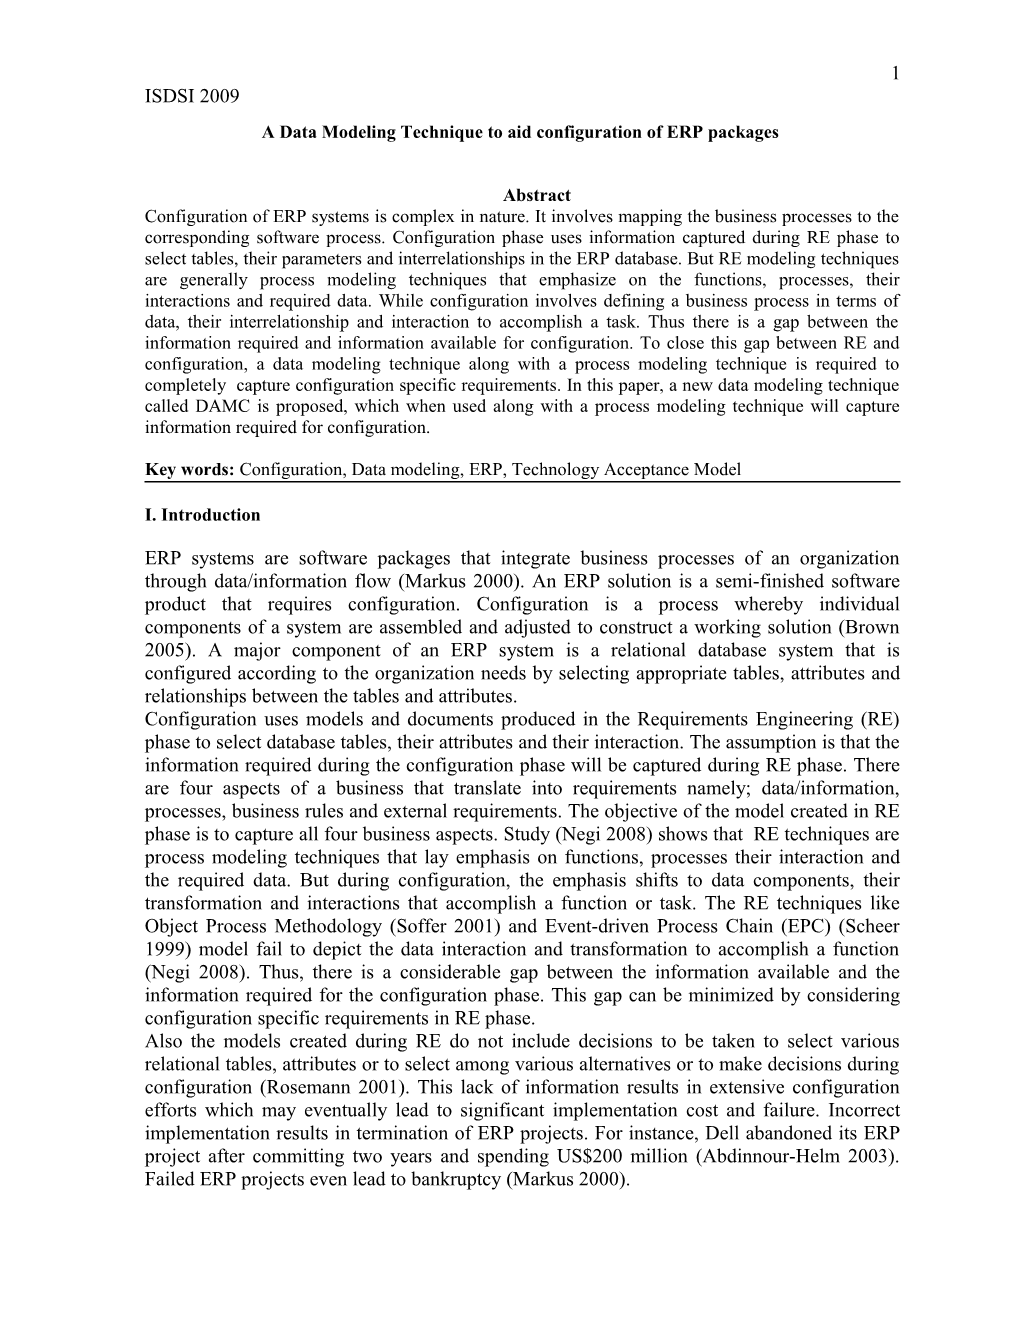 Paper Format for the Proceedings of the 2008 ISDSI International Conference (Times Roman